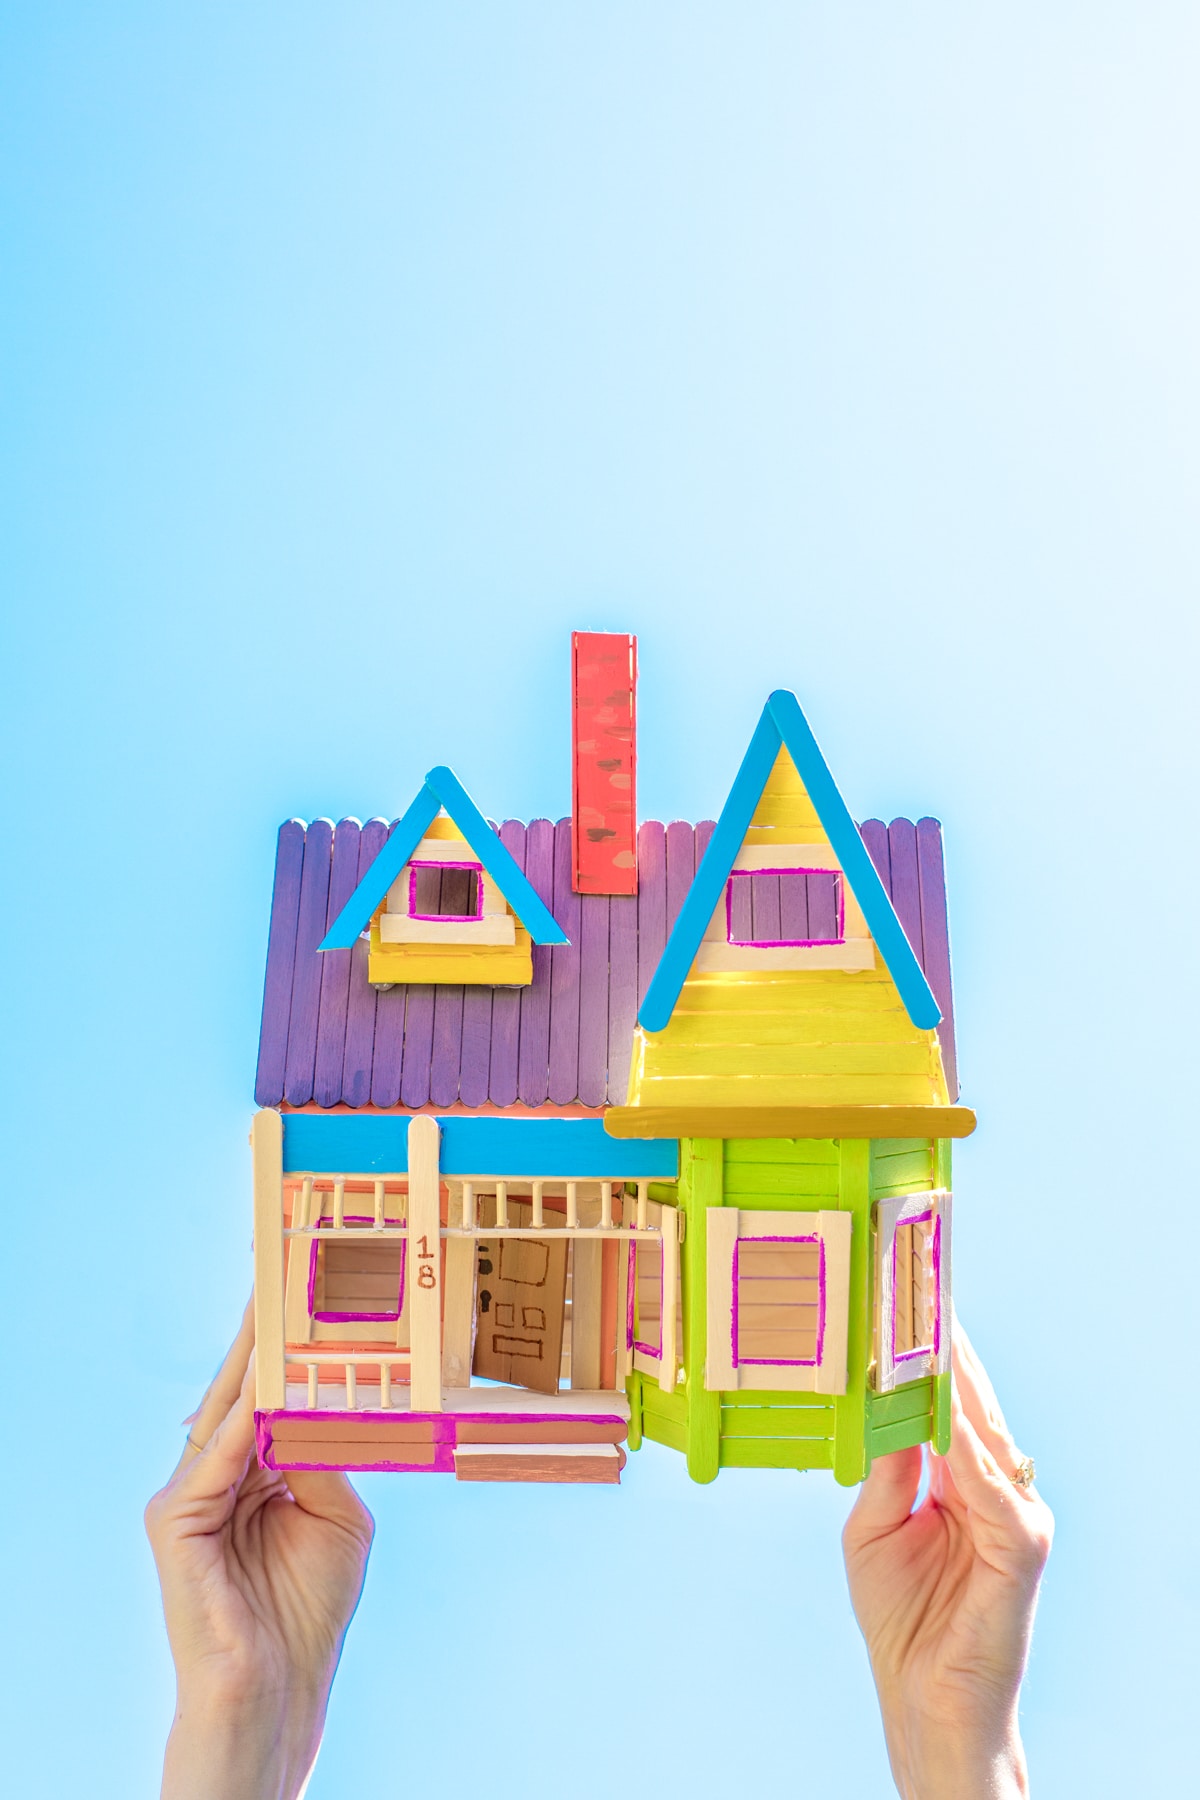 How To Make A Popsicle Stick Up House - Studio DIY